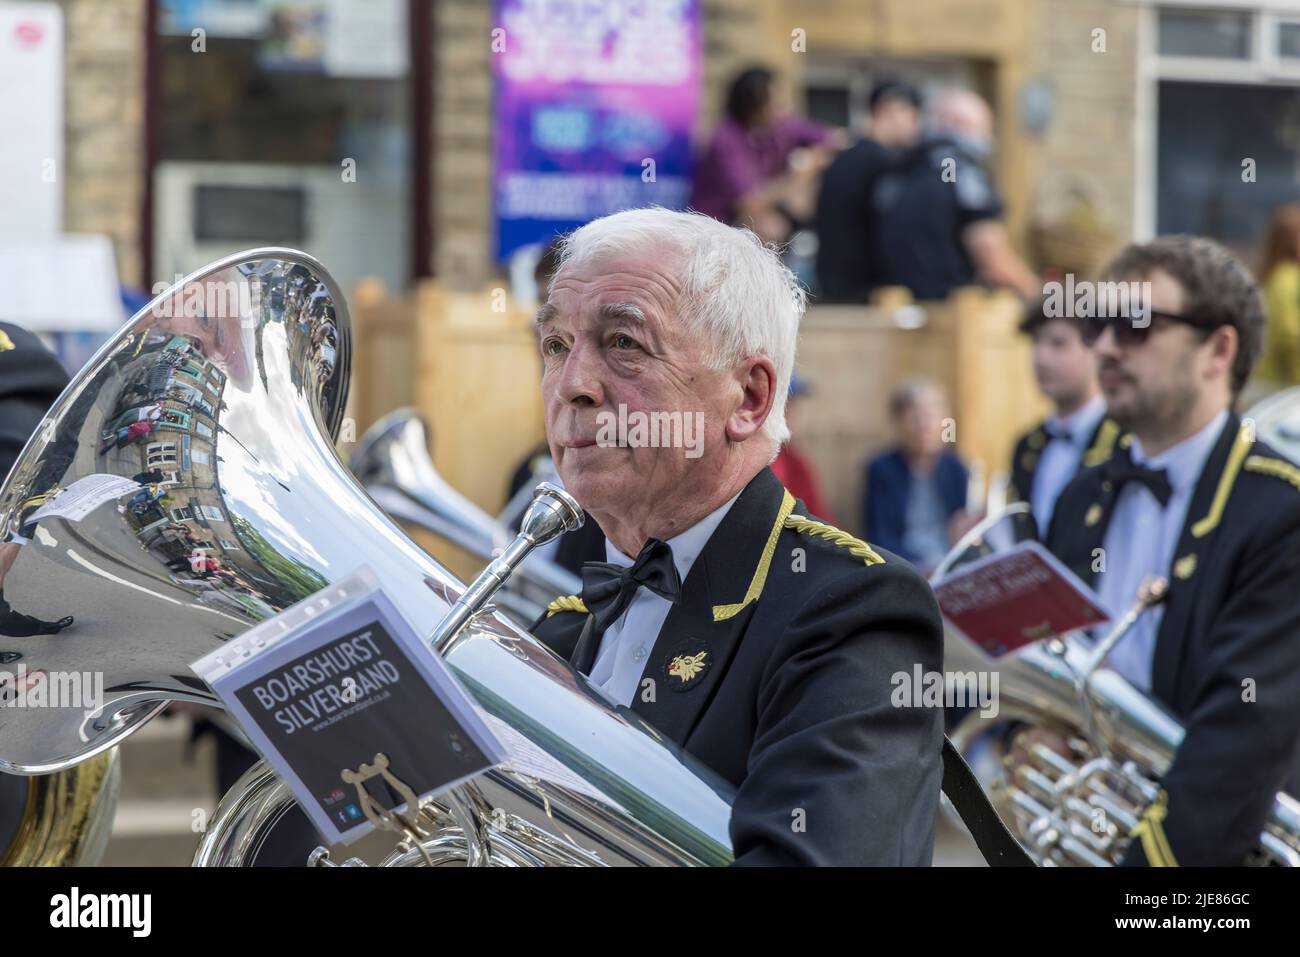 Senior musician participant with tuba on the street at the Uppermill Brass Band Whit Friday Contest, England. Stock Photo